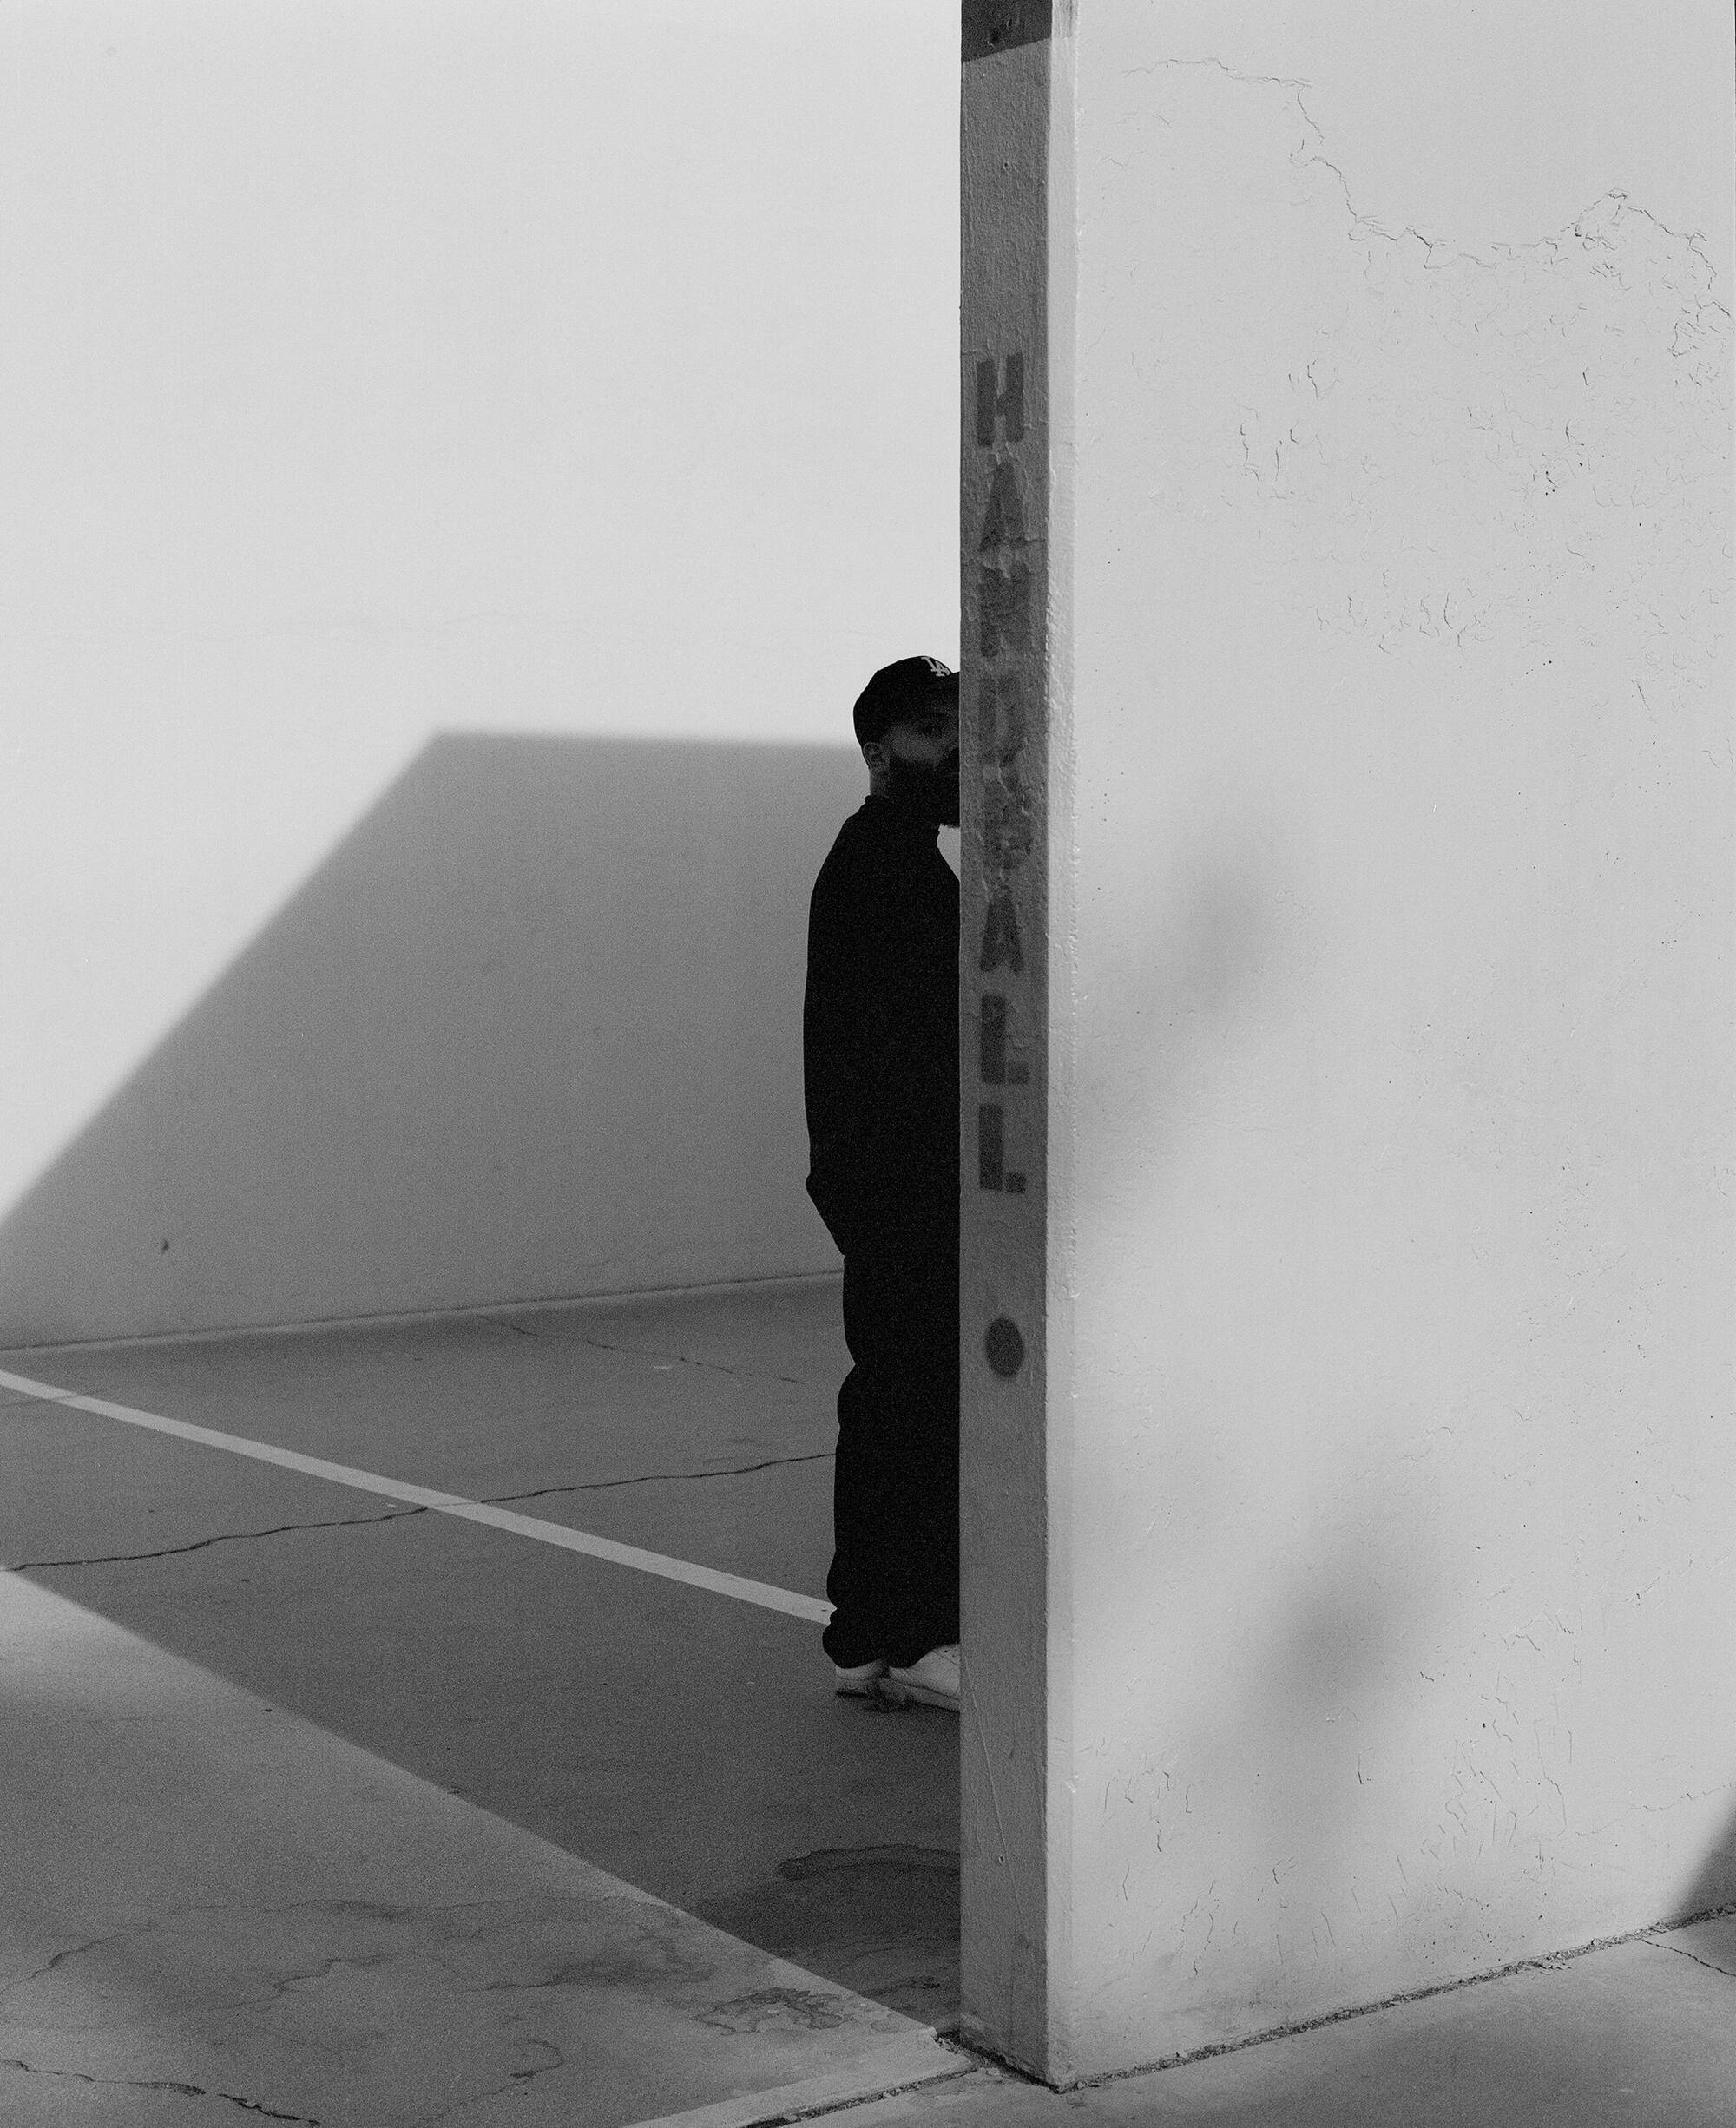 A black and white photo of the founder of ?edouze, Guillermo Juarez, standing behind a handball wall peeking at the camera